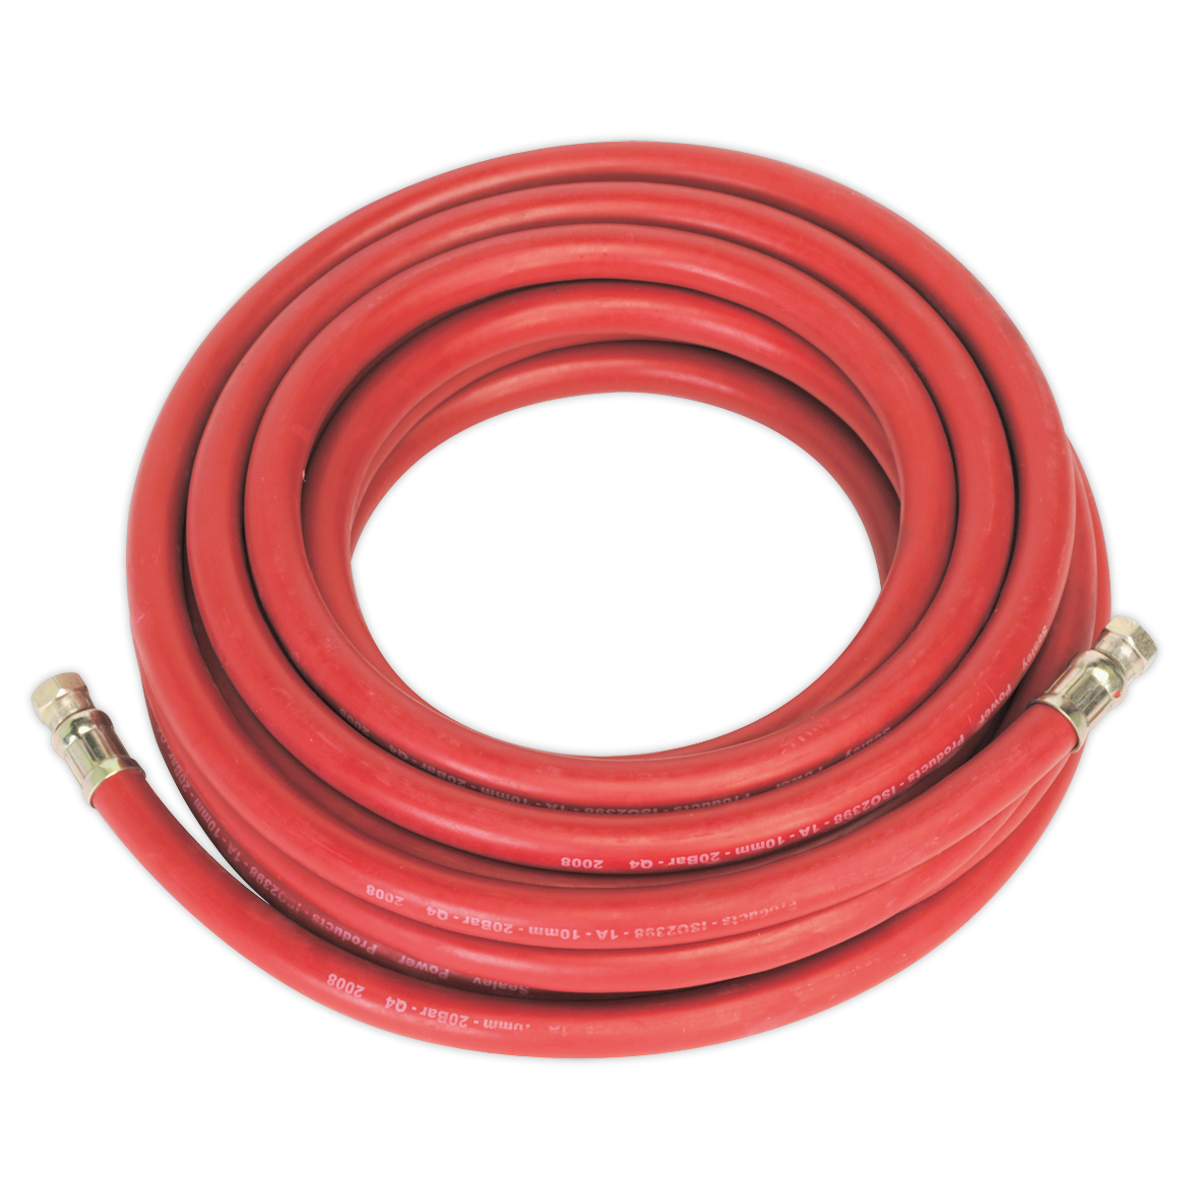 Sealey 10m x Ø10mm Air Hose with 1/4"BSP Unions AHC1038